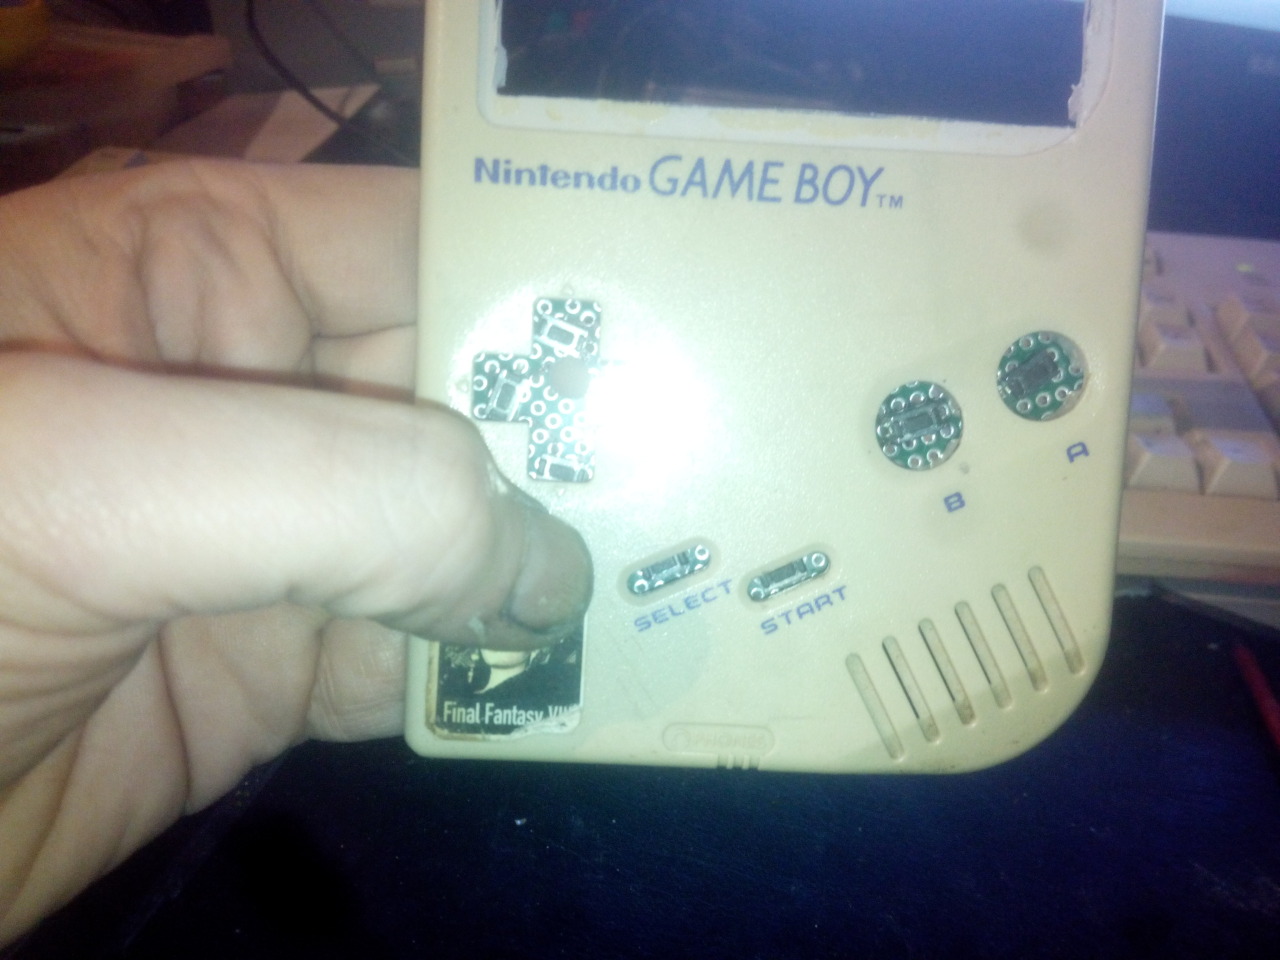 Gameboy Upgrade / Hack / Crack - Part IIMade my custom button pcb´sNext step refitting the original buttons 